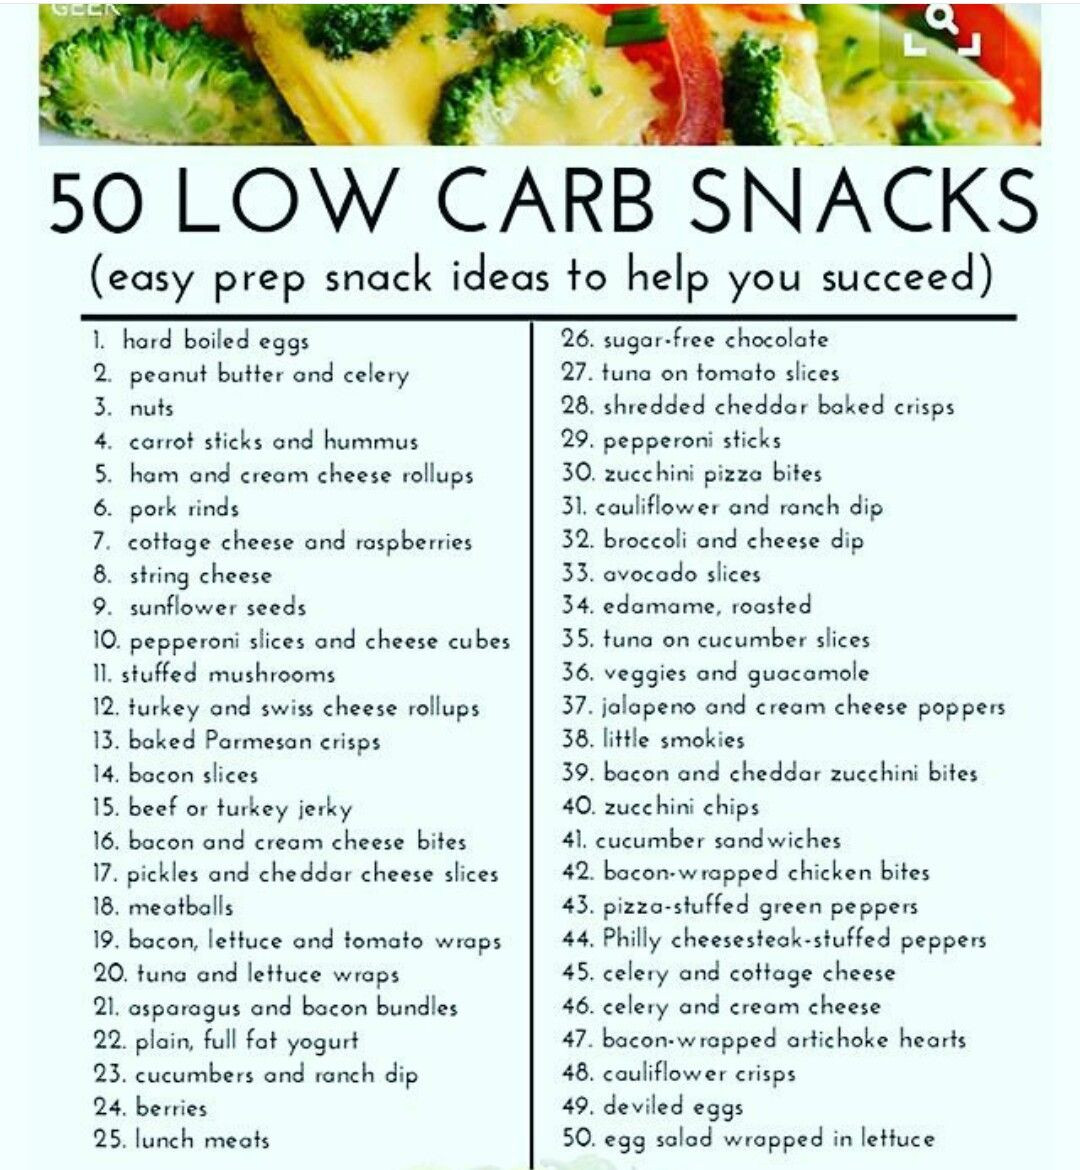 Low Carb Healthy Snacks
 50 Low Carb Snack Ideas